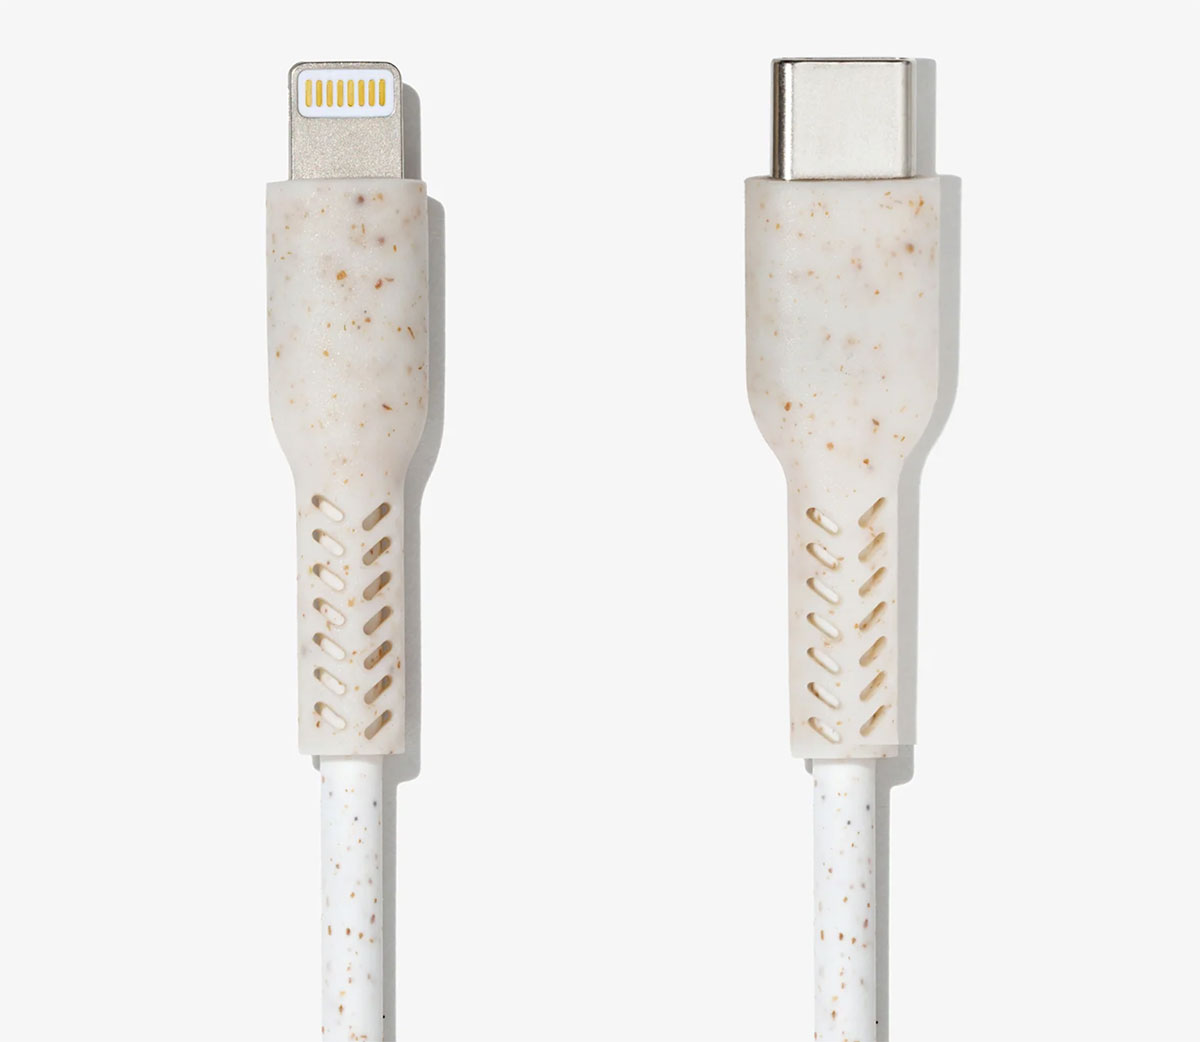 Wave Bio-Based Lightning Charging Cable – Best eco-friendly Lightning cable